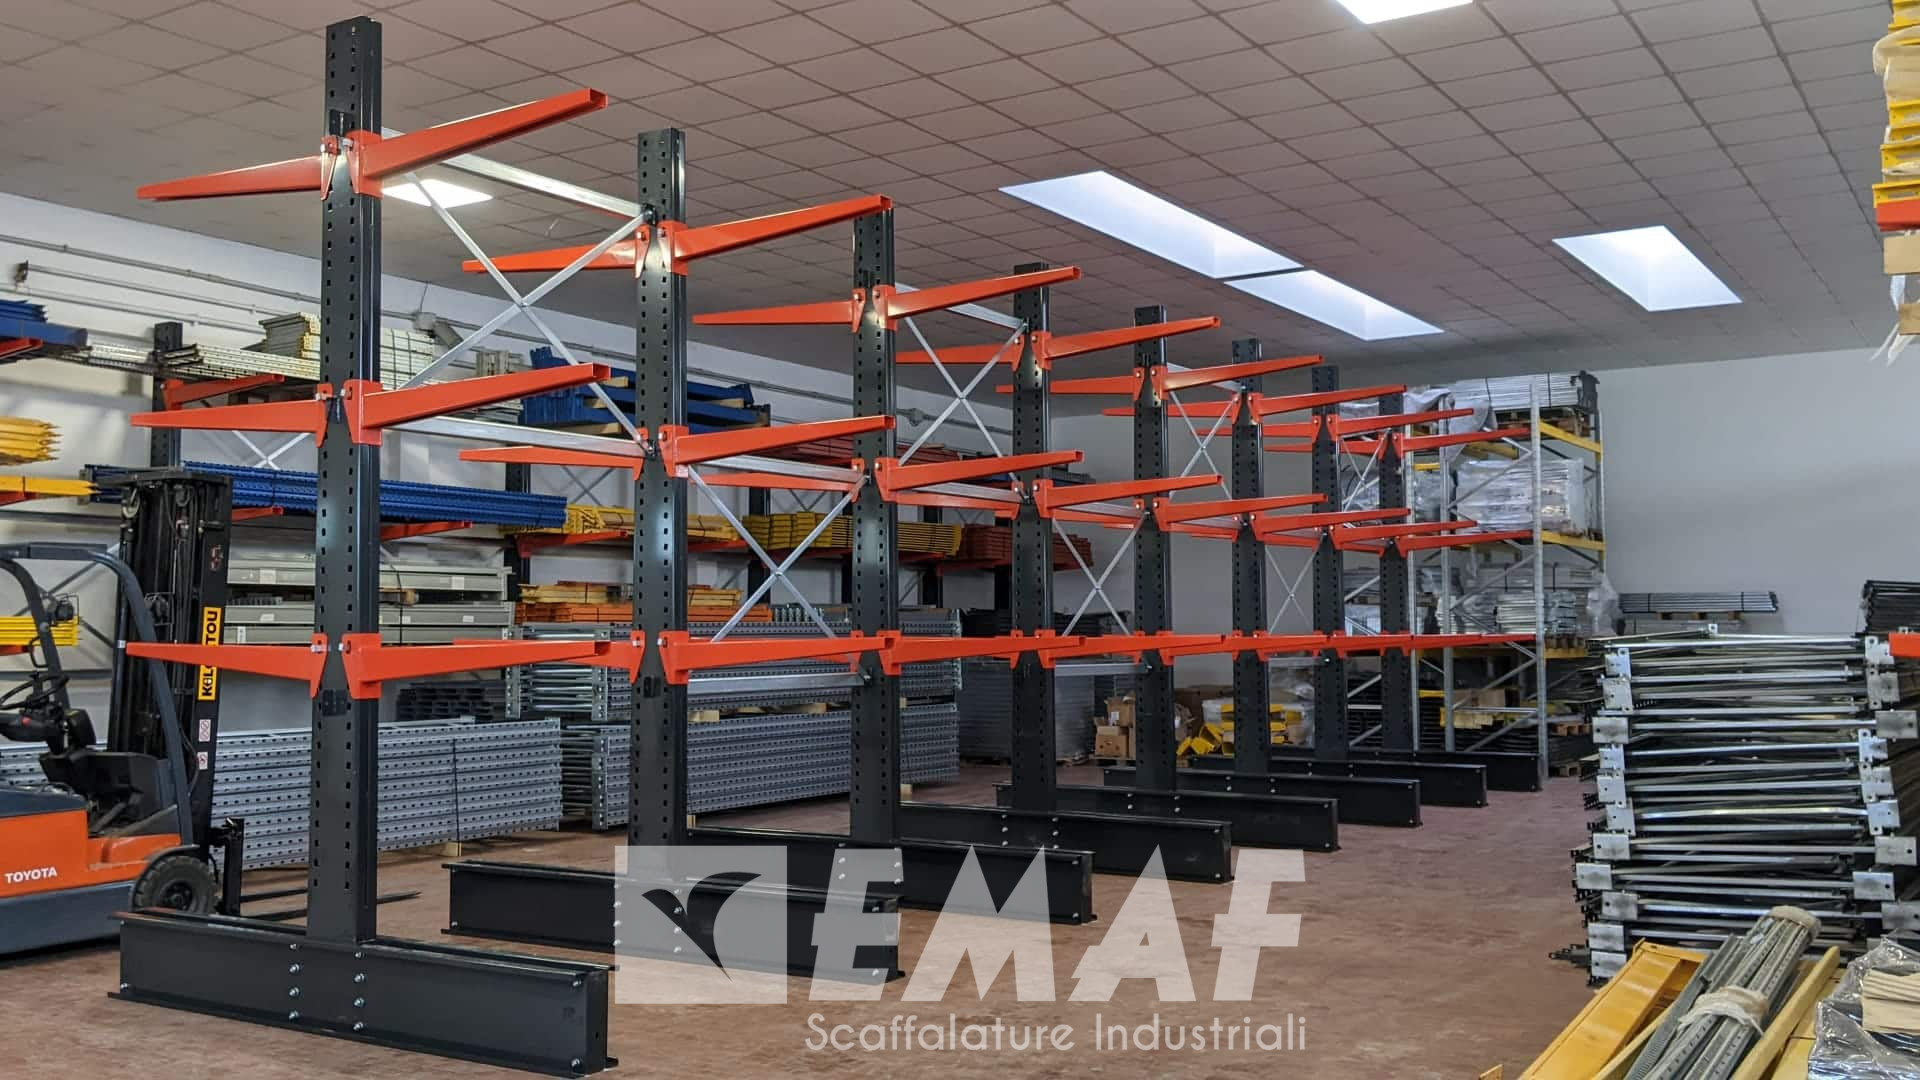 Featured image for “Cantilever EMAF per stoccare scaffalature”